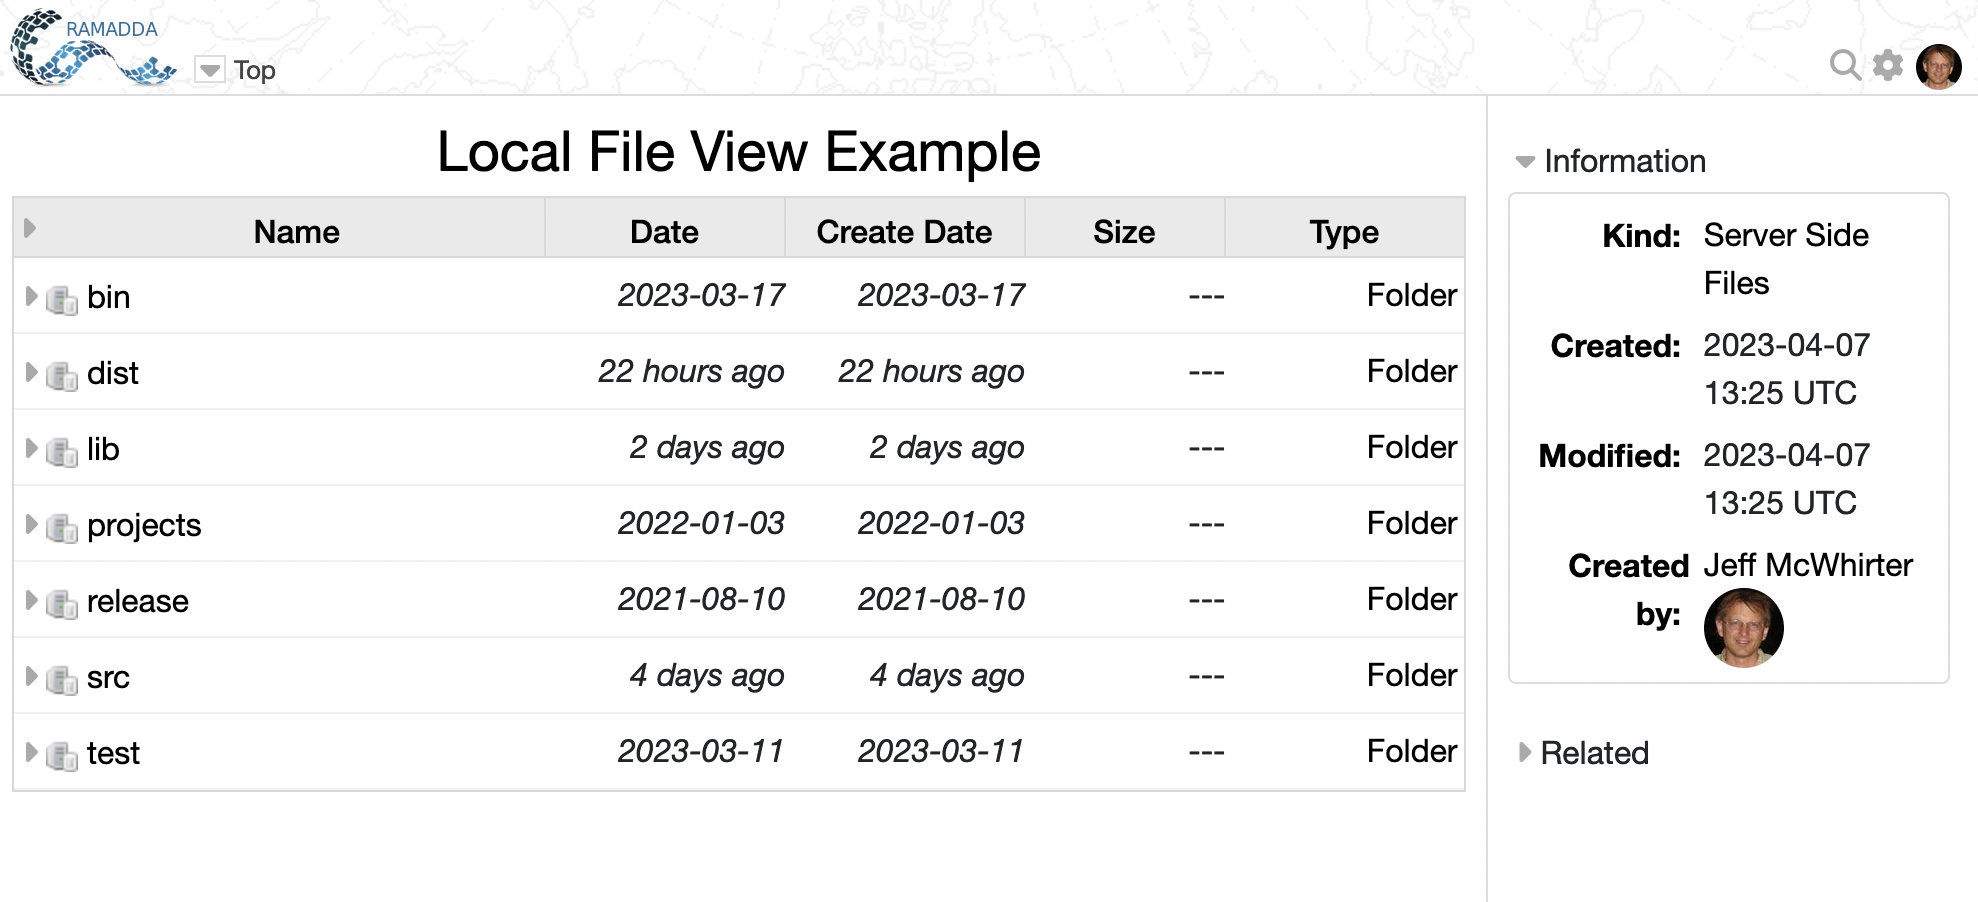 Local File View Example